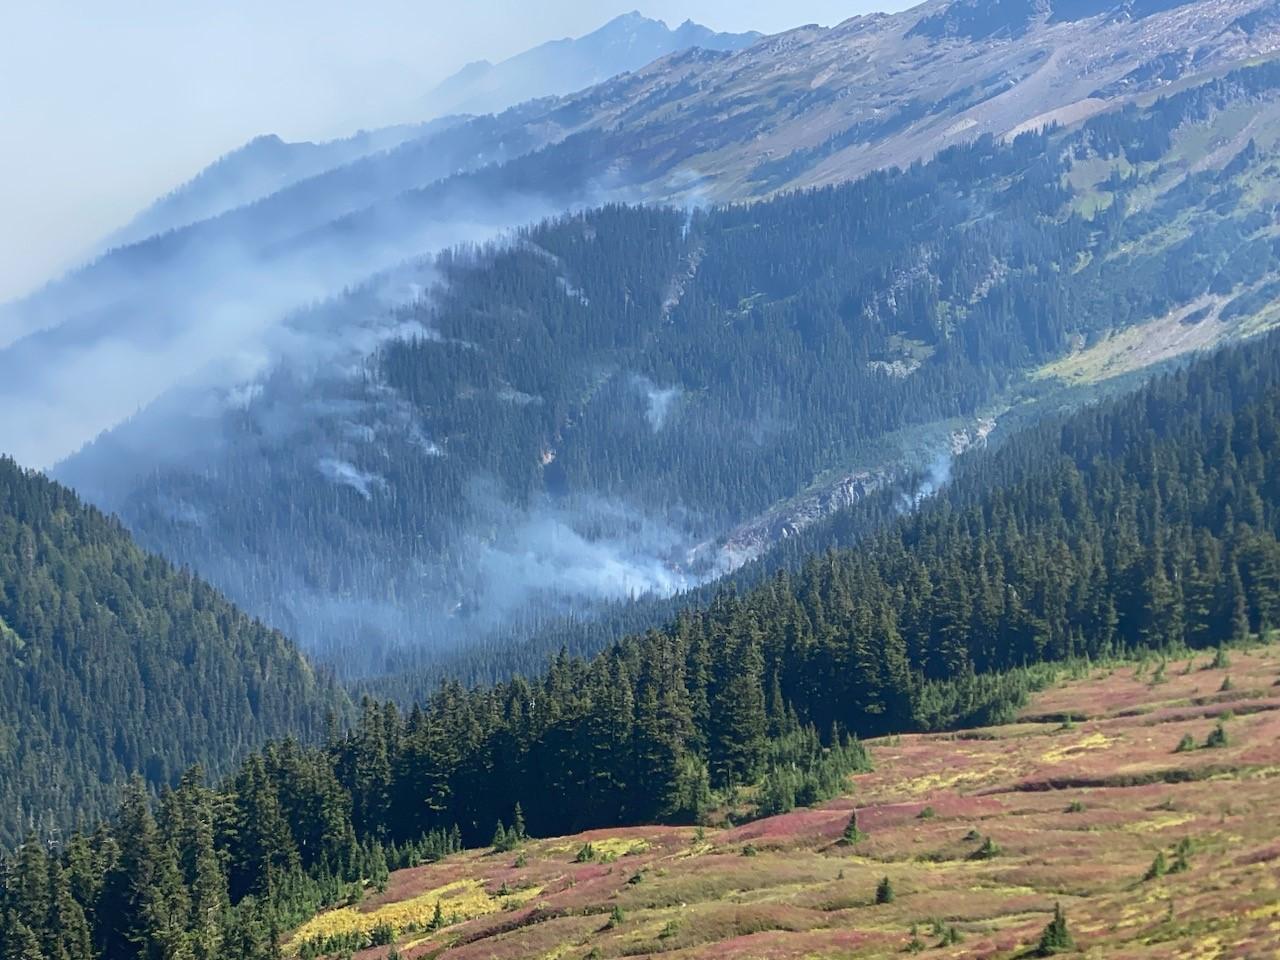 Wispy white smoke from the Airplane Lake Fire is visible from the Pacific Crest Trail near White Pass in the Glacier Peak Wilderness Area.